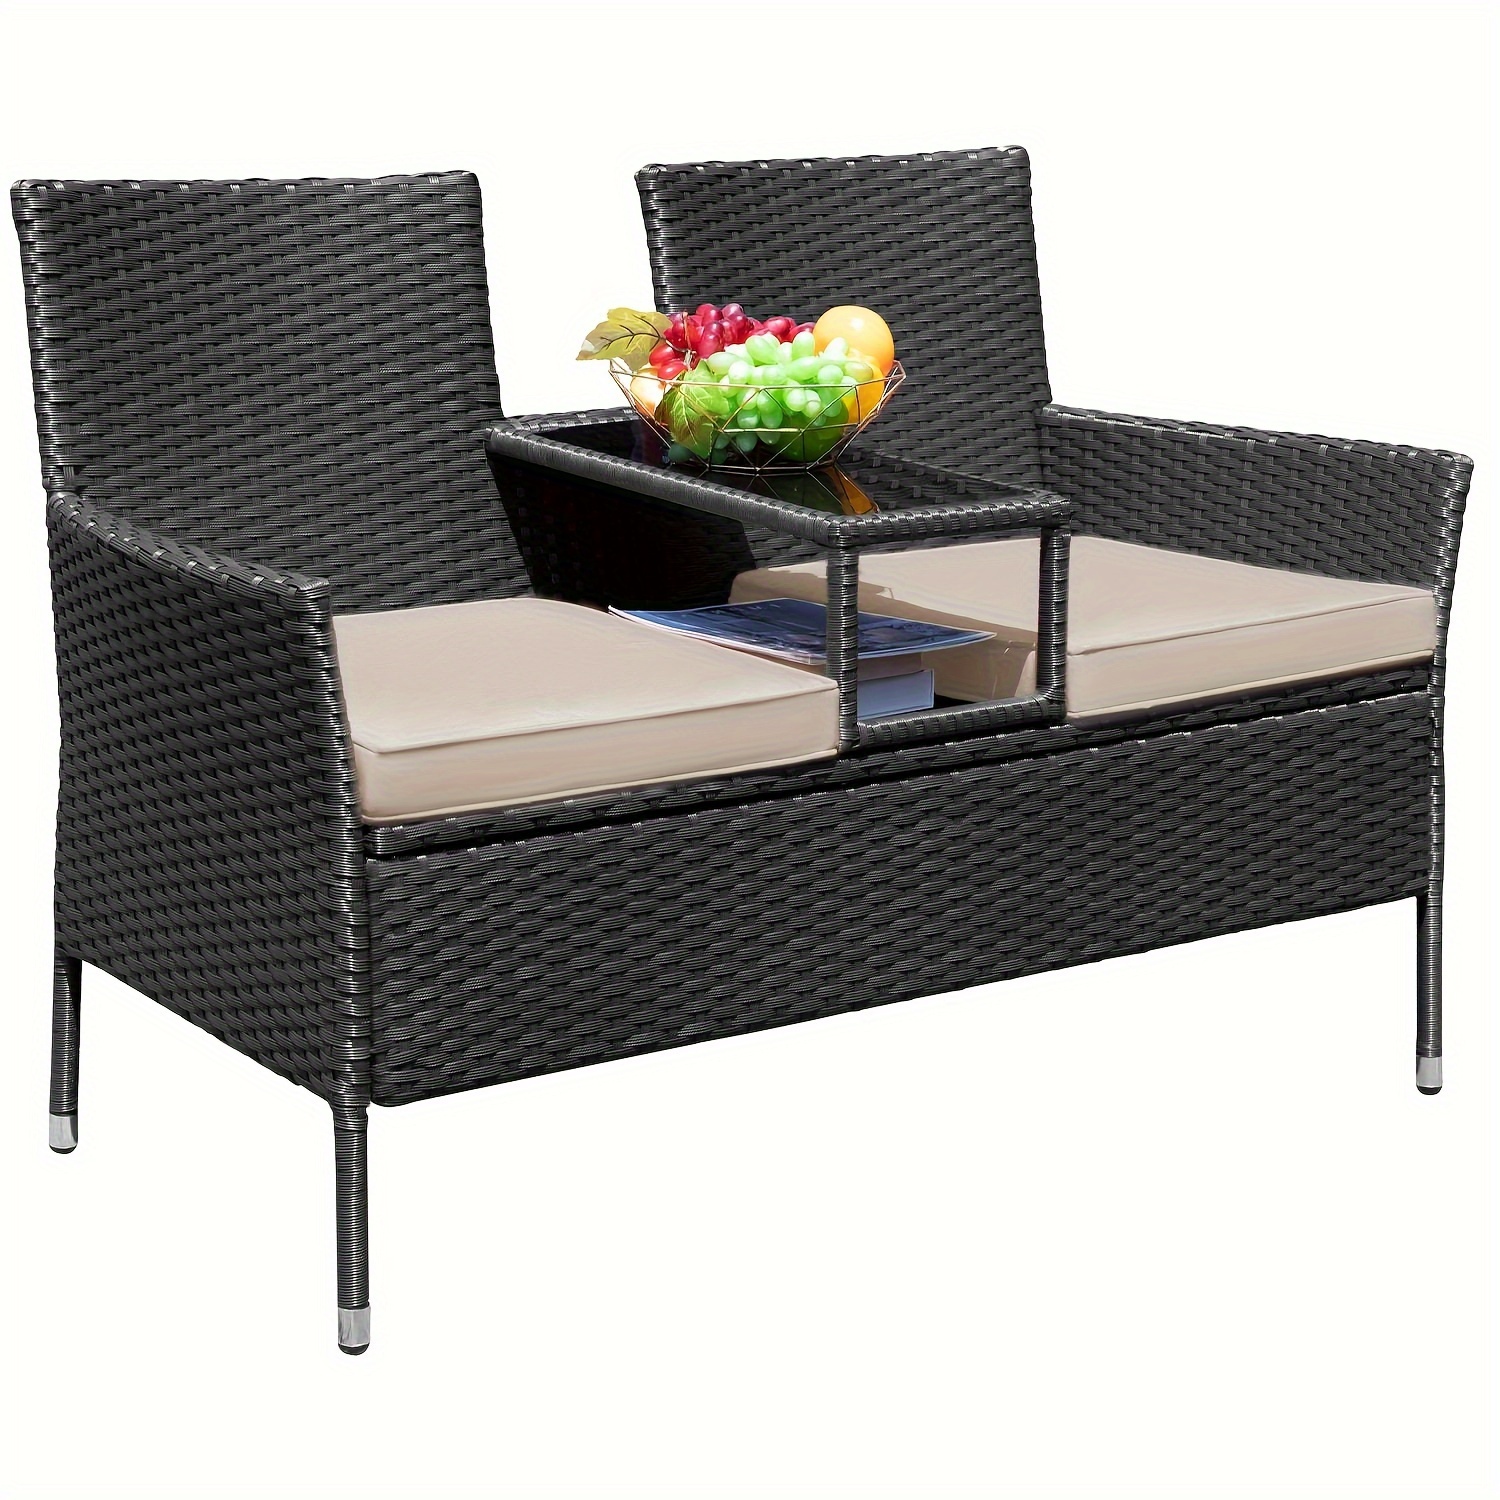 

1pc Outdoor Furniture Set, Rattan Wicker Patio Loveseat With Cushions And Built-in Glass Coffee Table, Steel Frame, Weather-resistant, 50.8" Length For Garden, Poolside, Balcony Decor